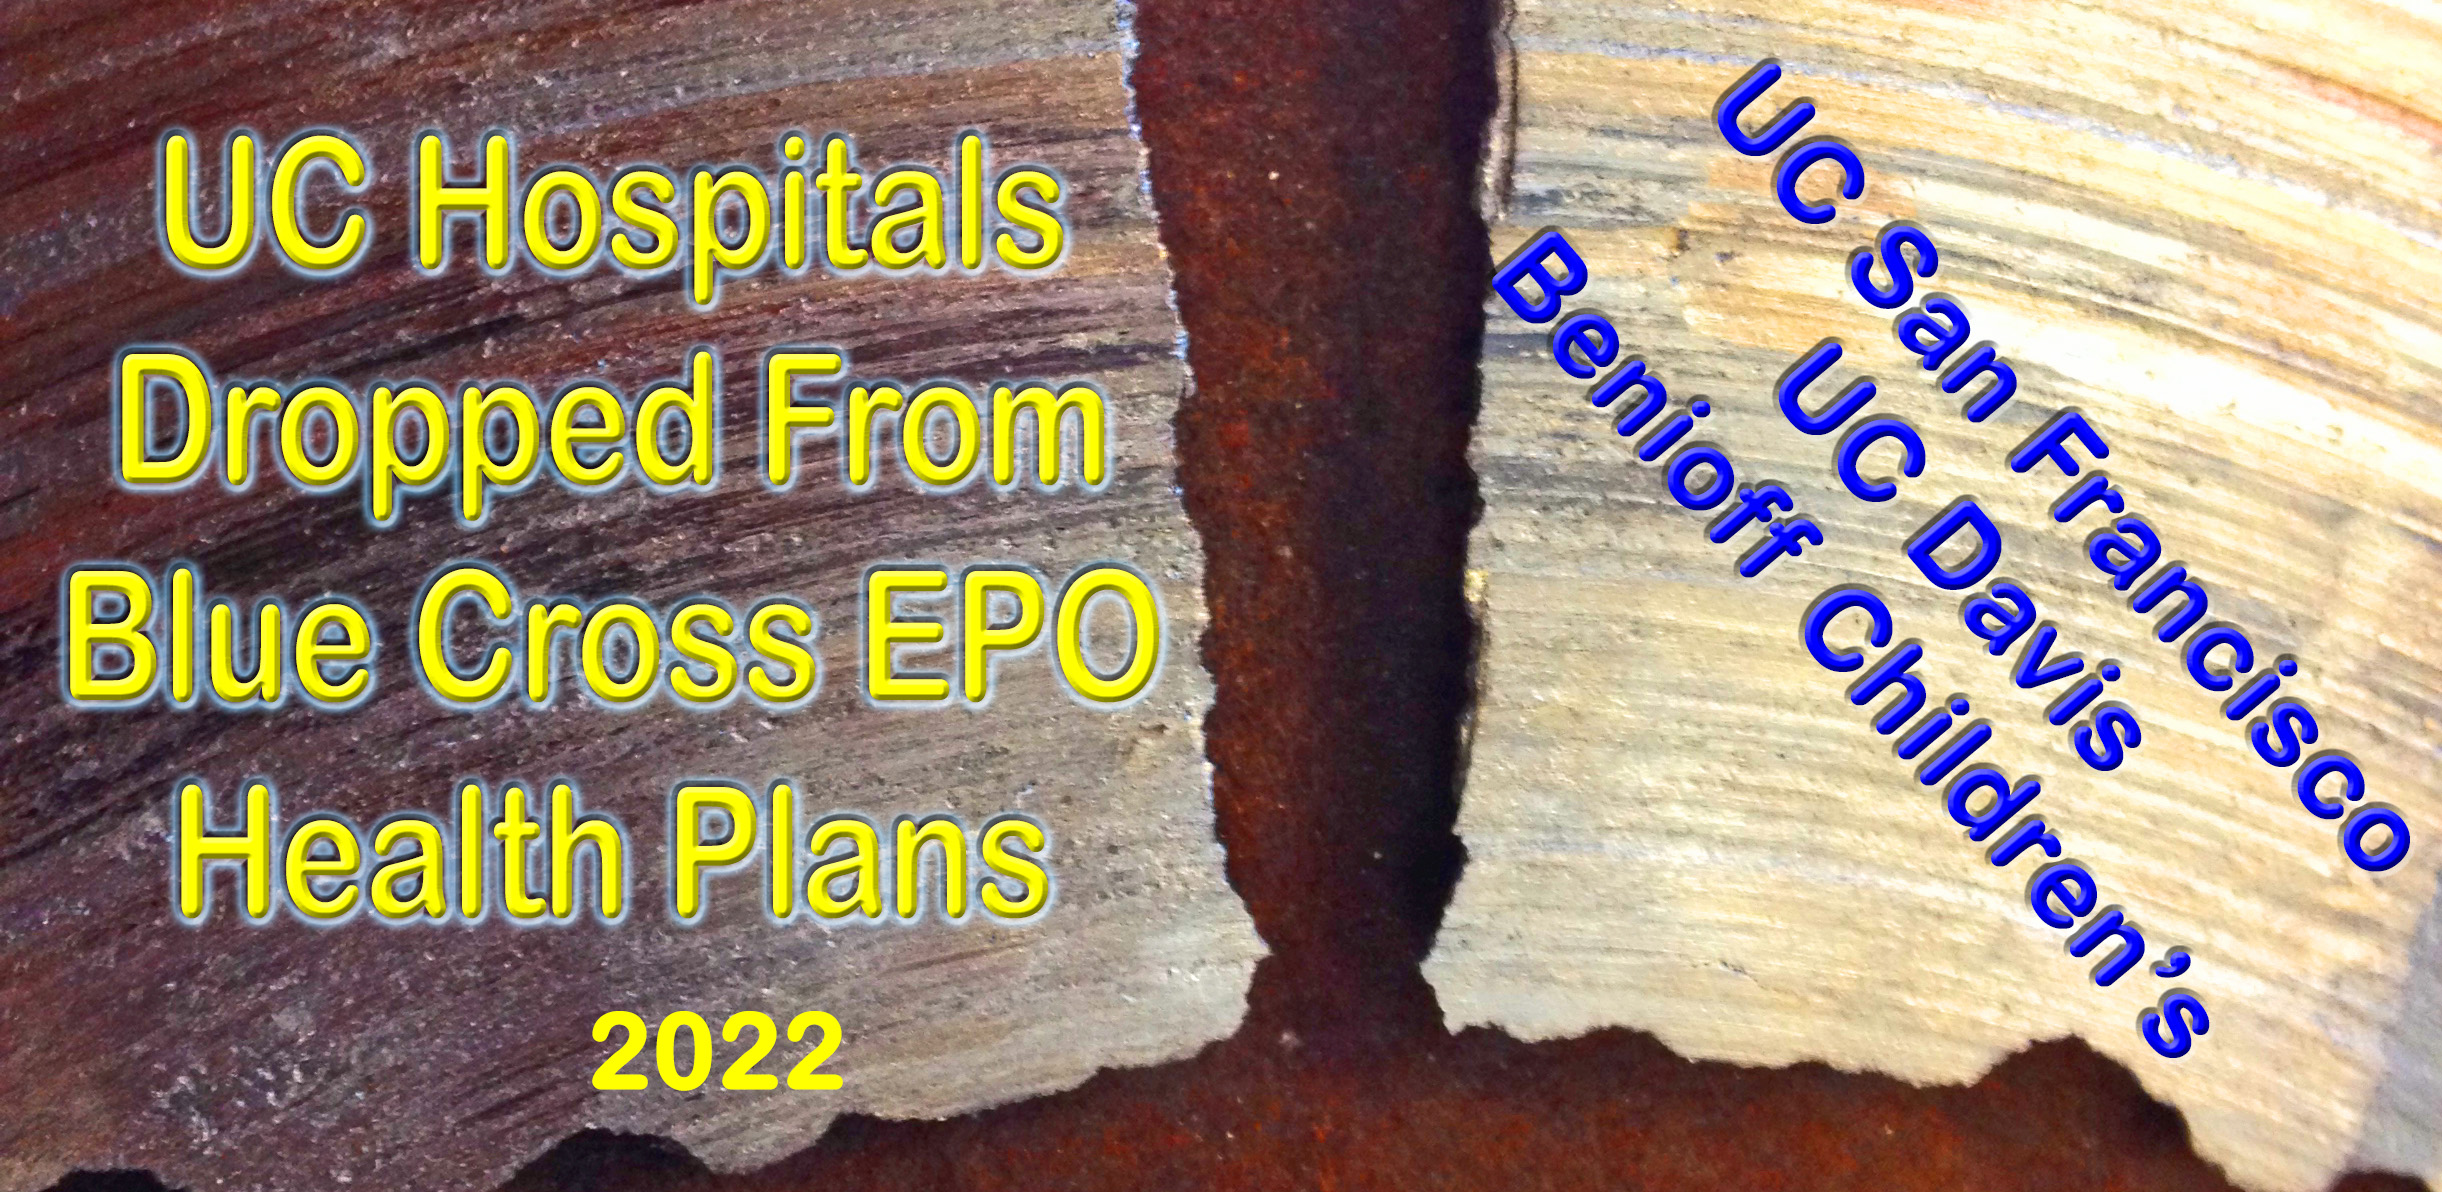 Certain UC hospitals in Northern California will no longer be in-network with Blue Cross EPO health plans for 2022.